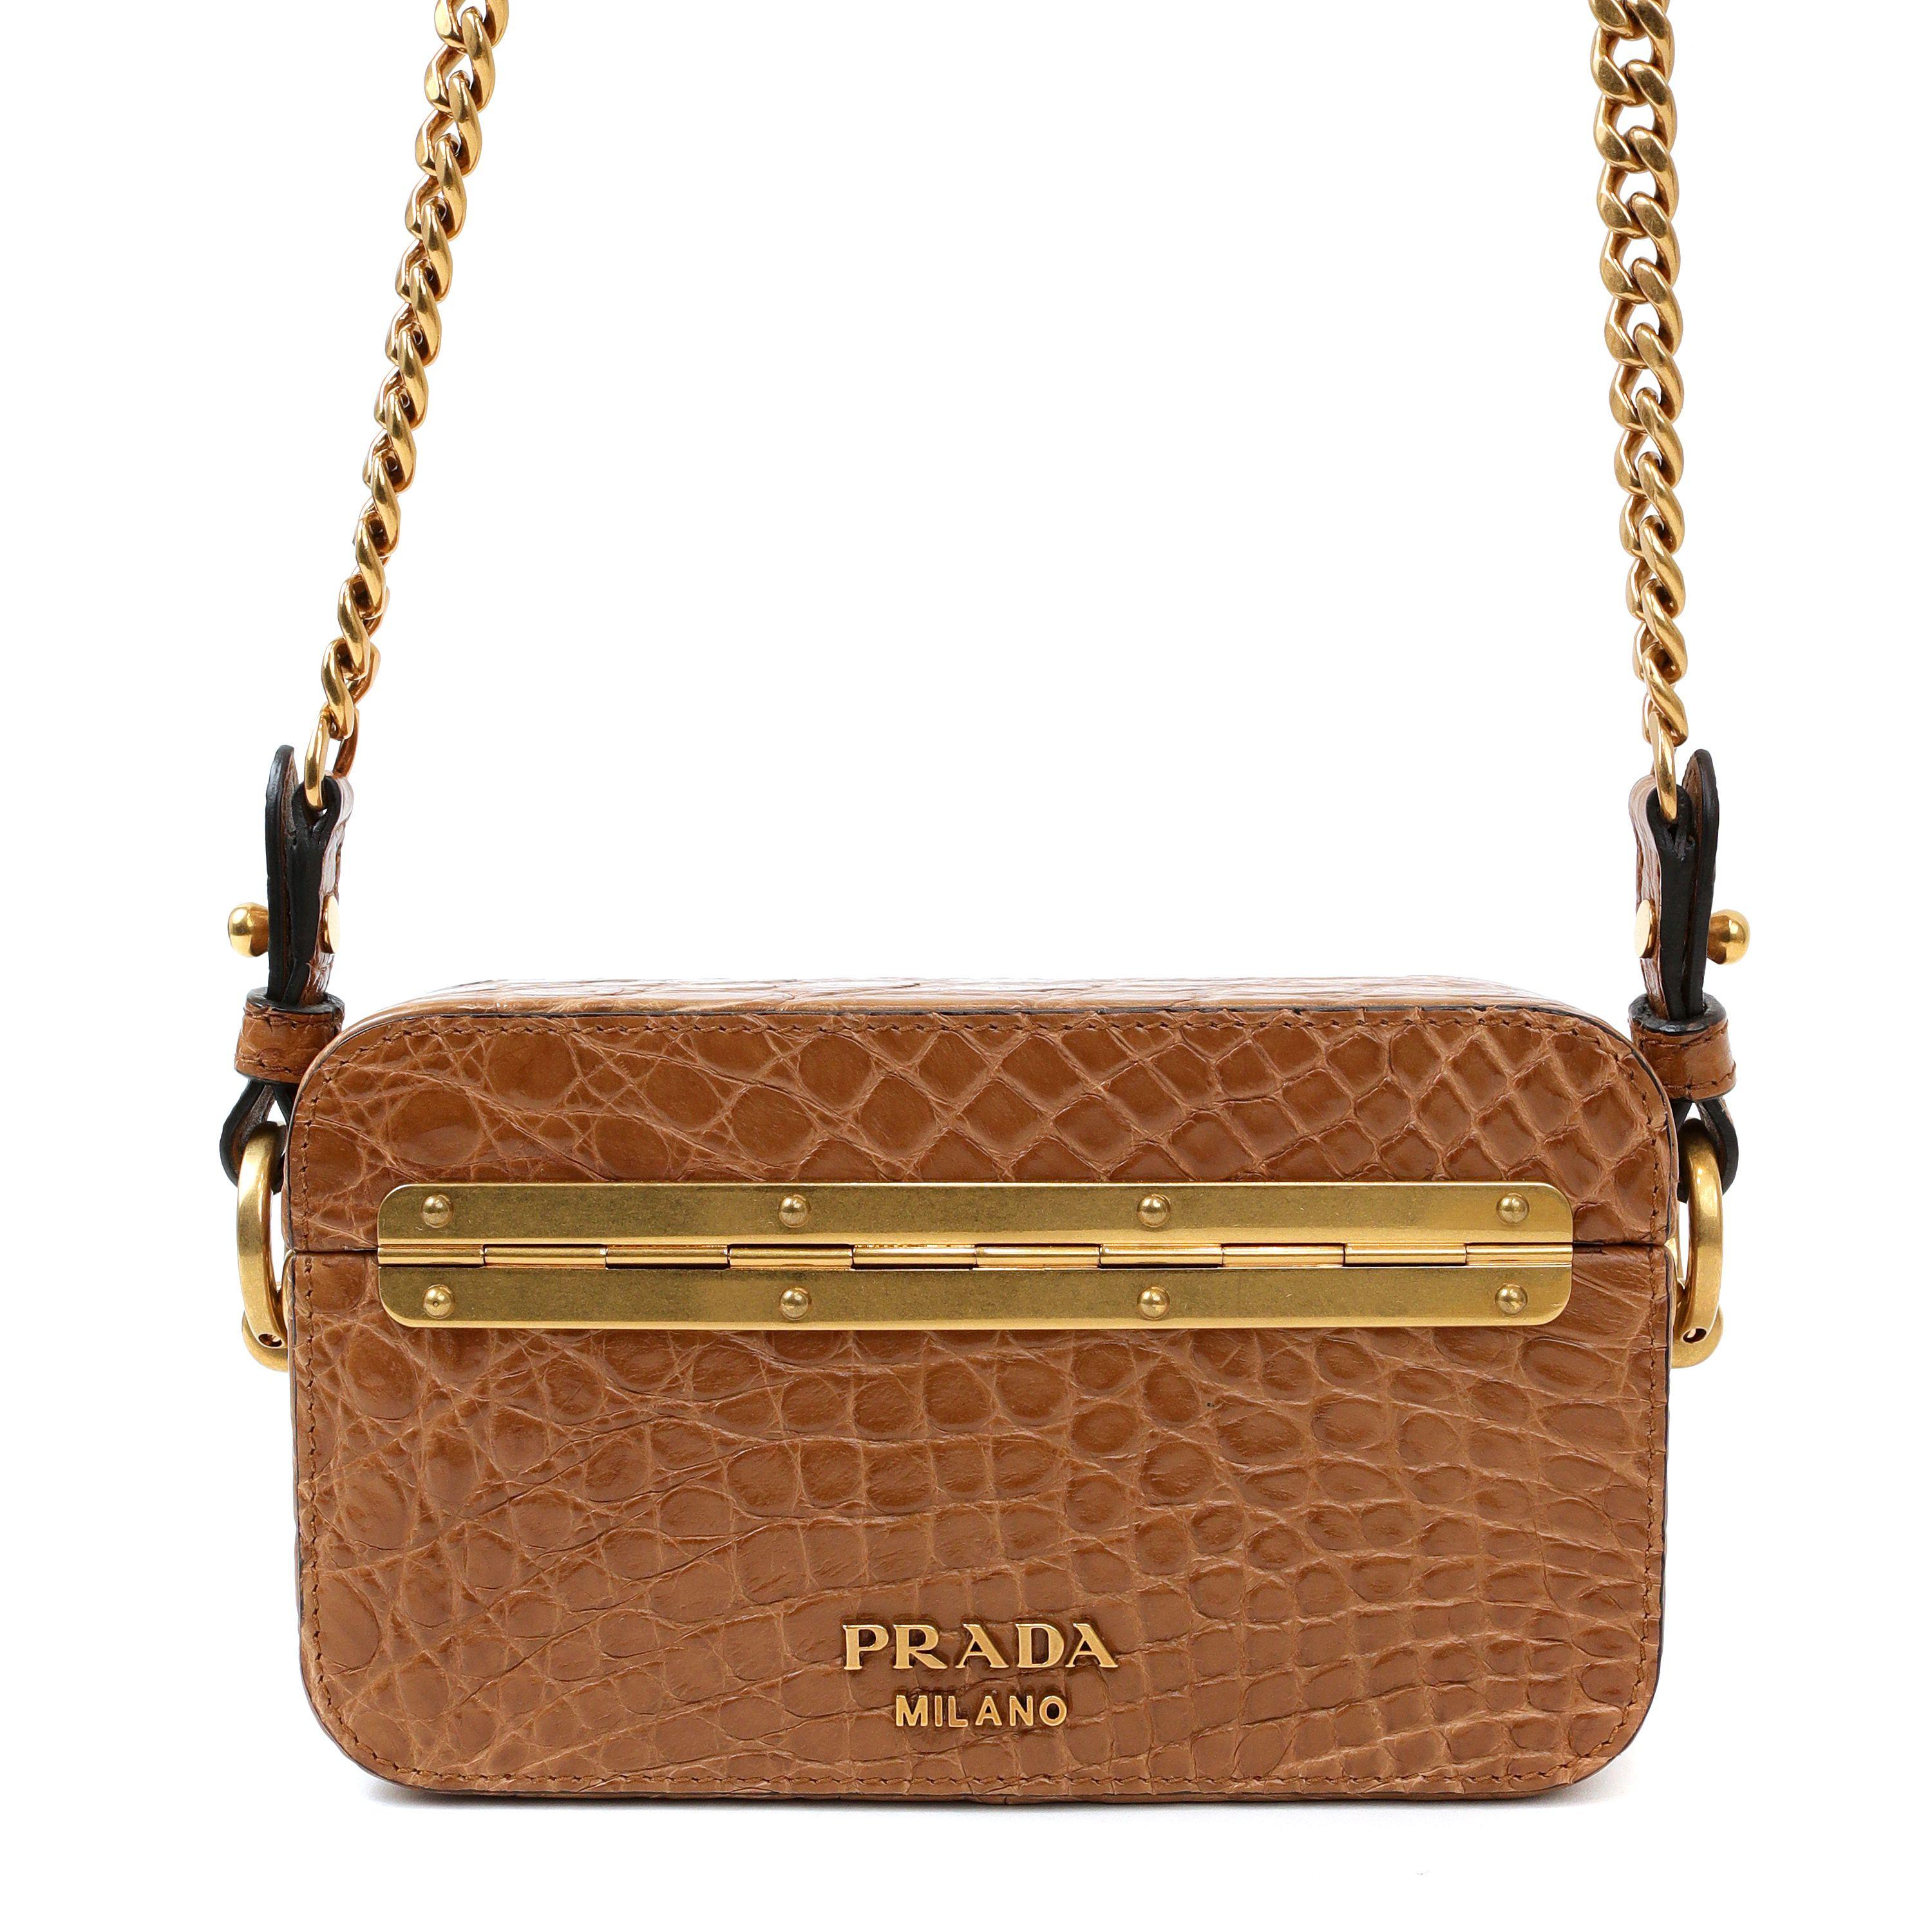 This authentic Prada Cognac Crocodile Crossbody is in pristine condition.  Warm cognac brown crocodile hard case bag with hinged top.  Gold tone chain strap. Dust bag included.


PBF 13763